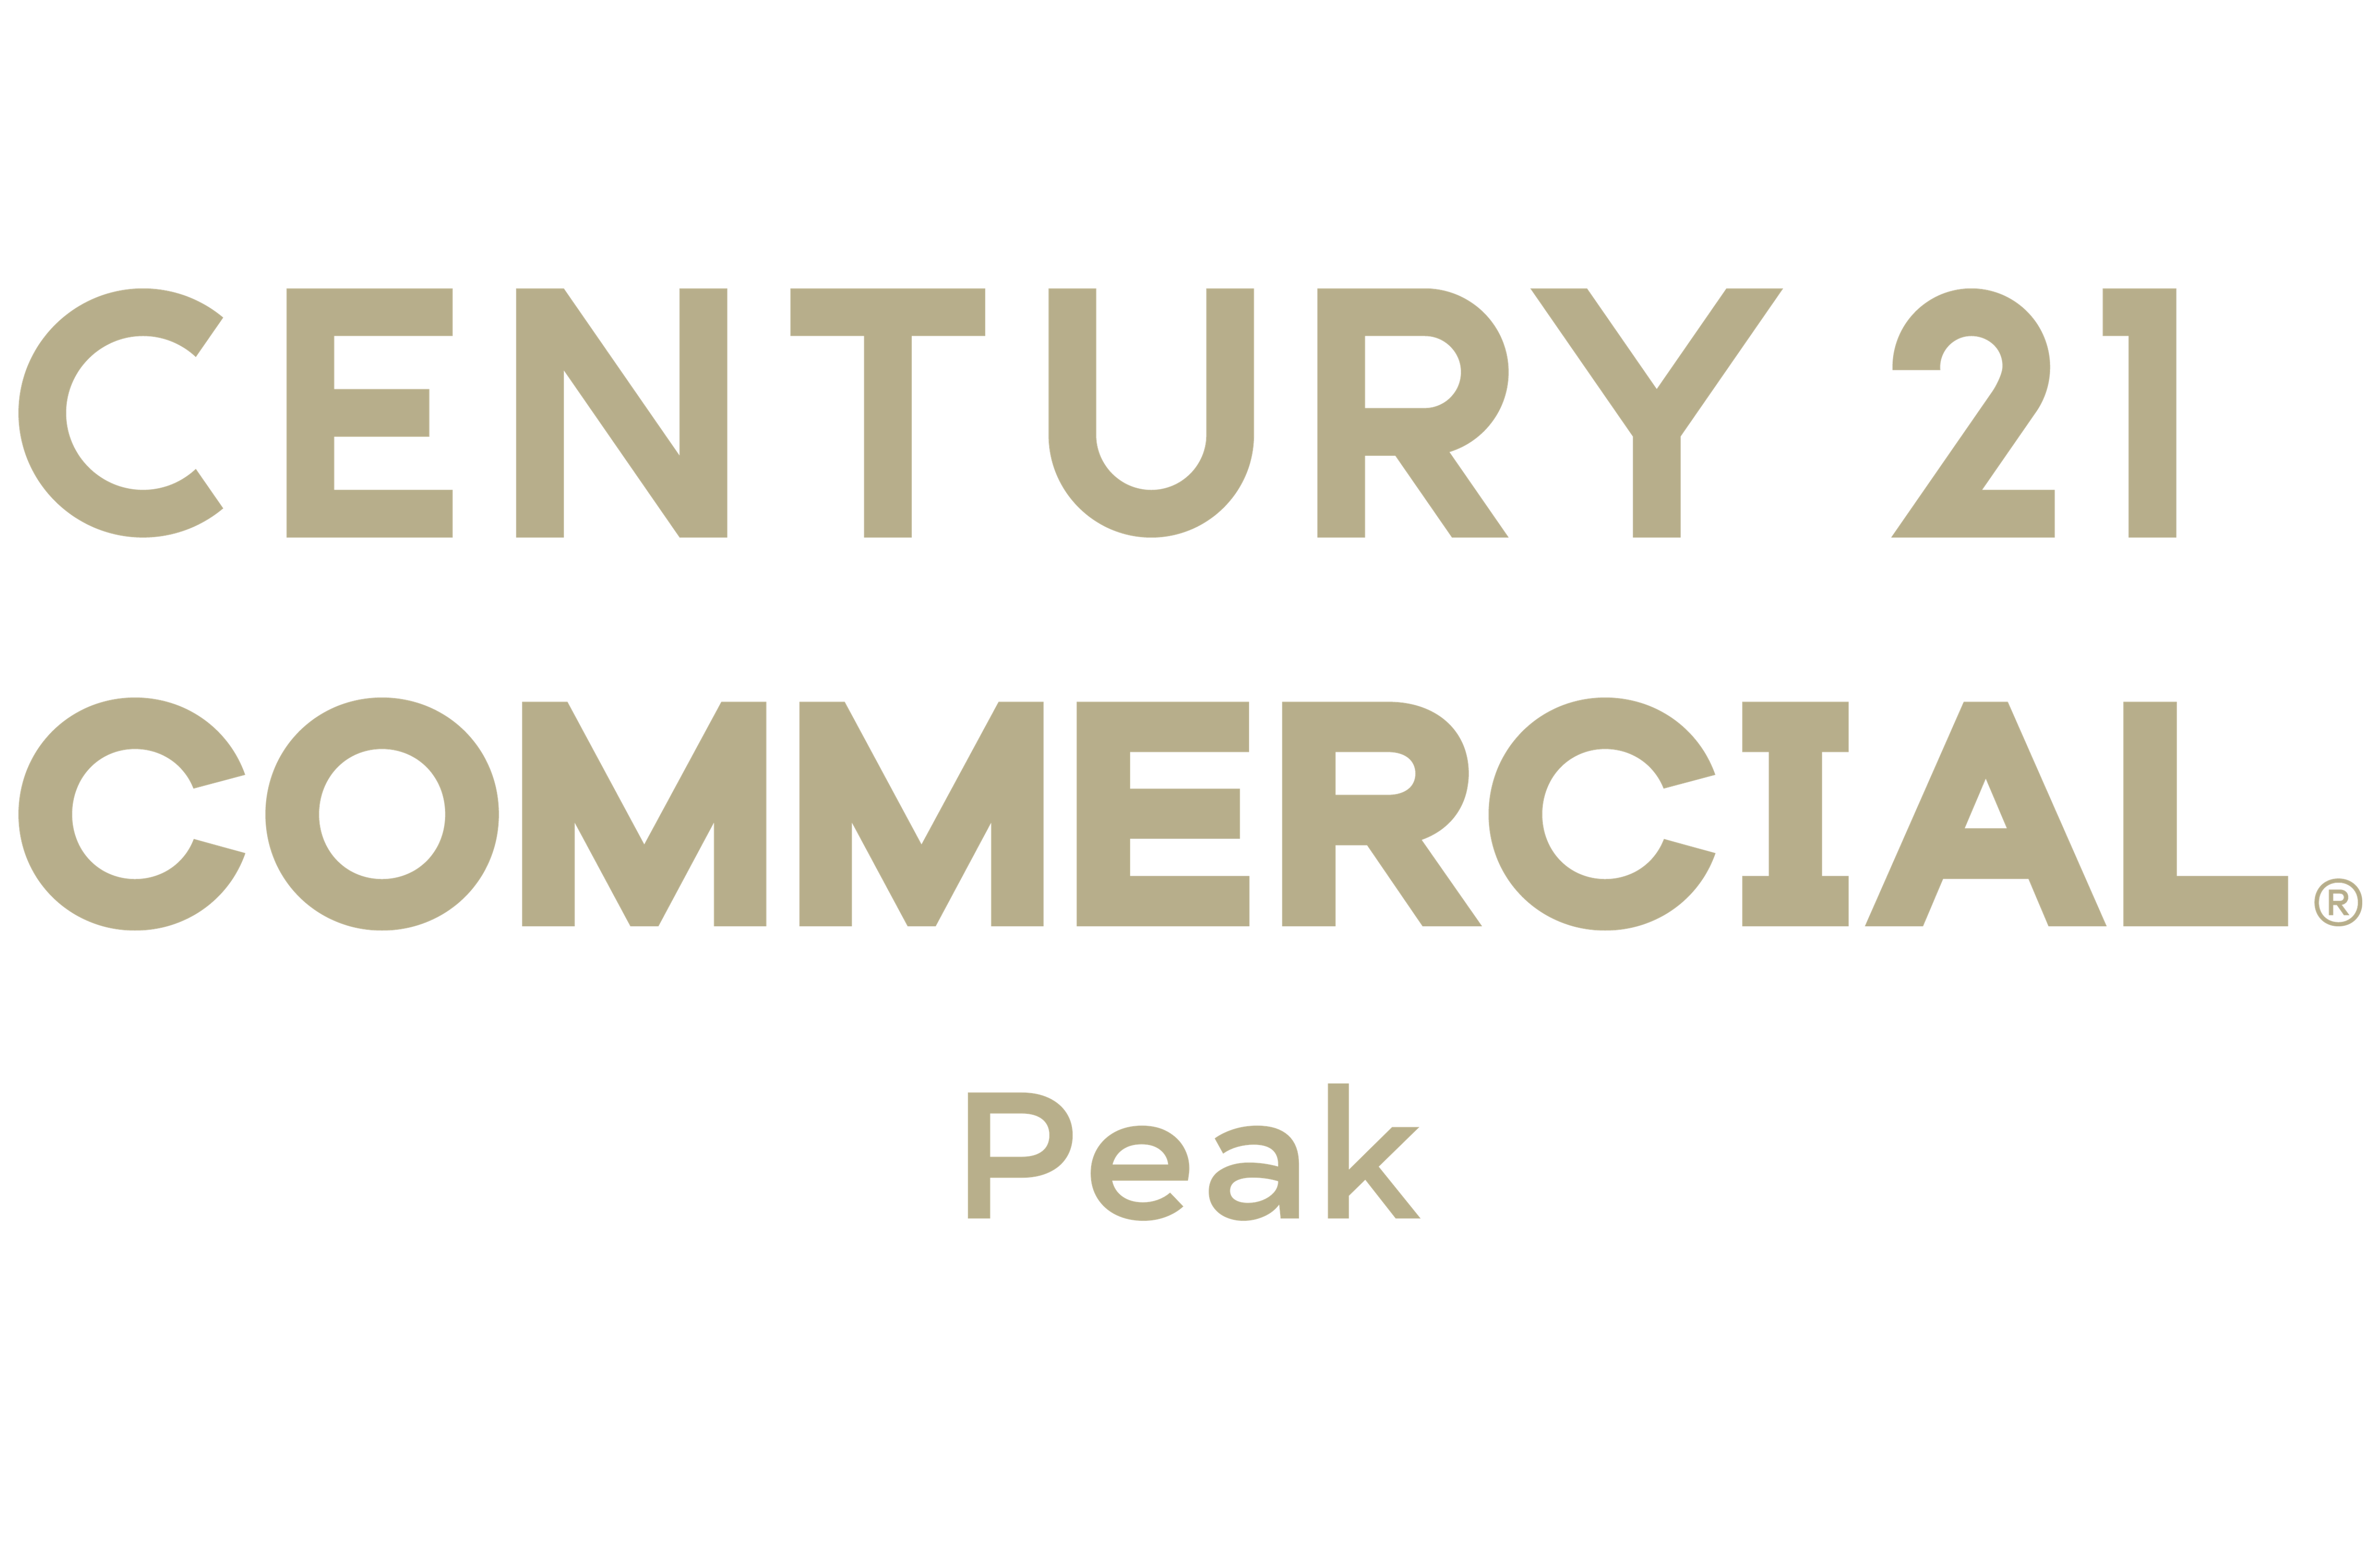 Call 323-456-6110 Fernando Spindola CENTURY 21 COMMERCIAL PEAK: A symbol of trust and expertise in commercial real estate.